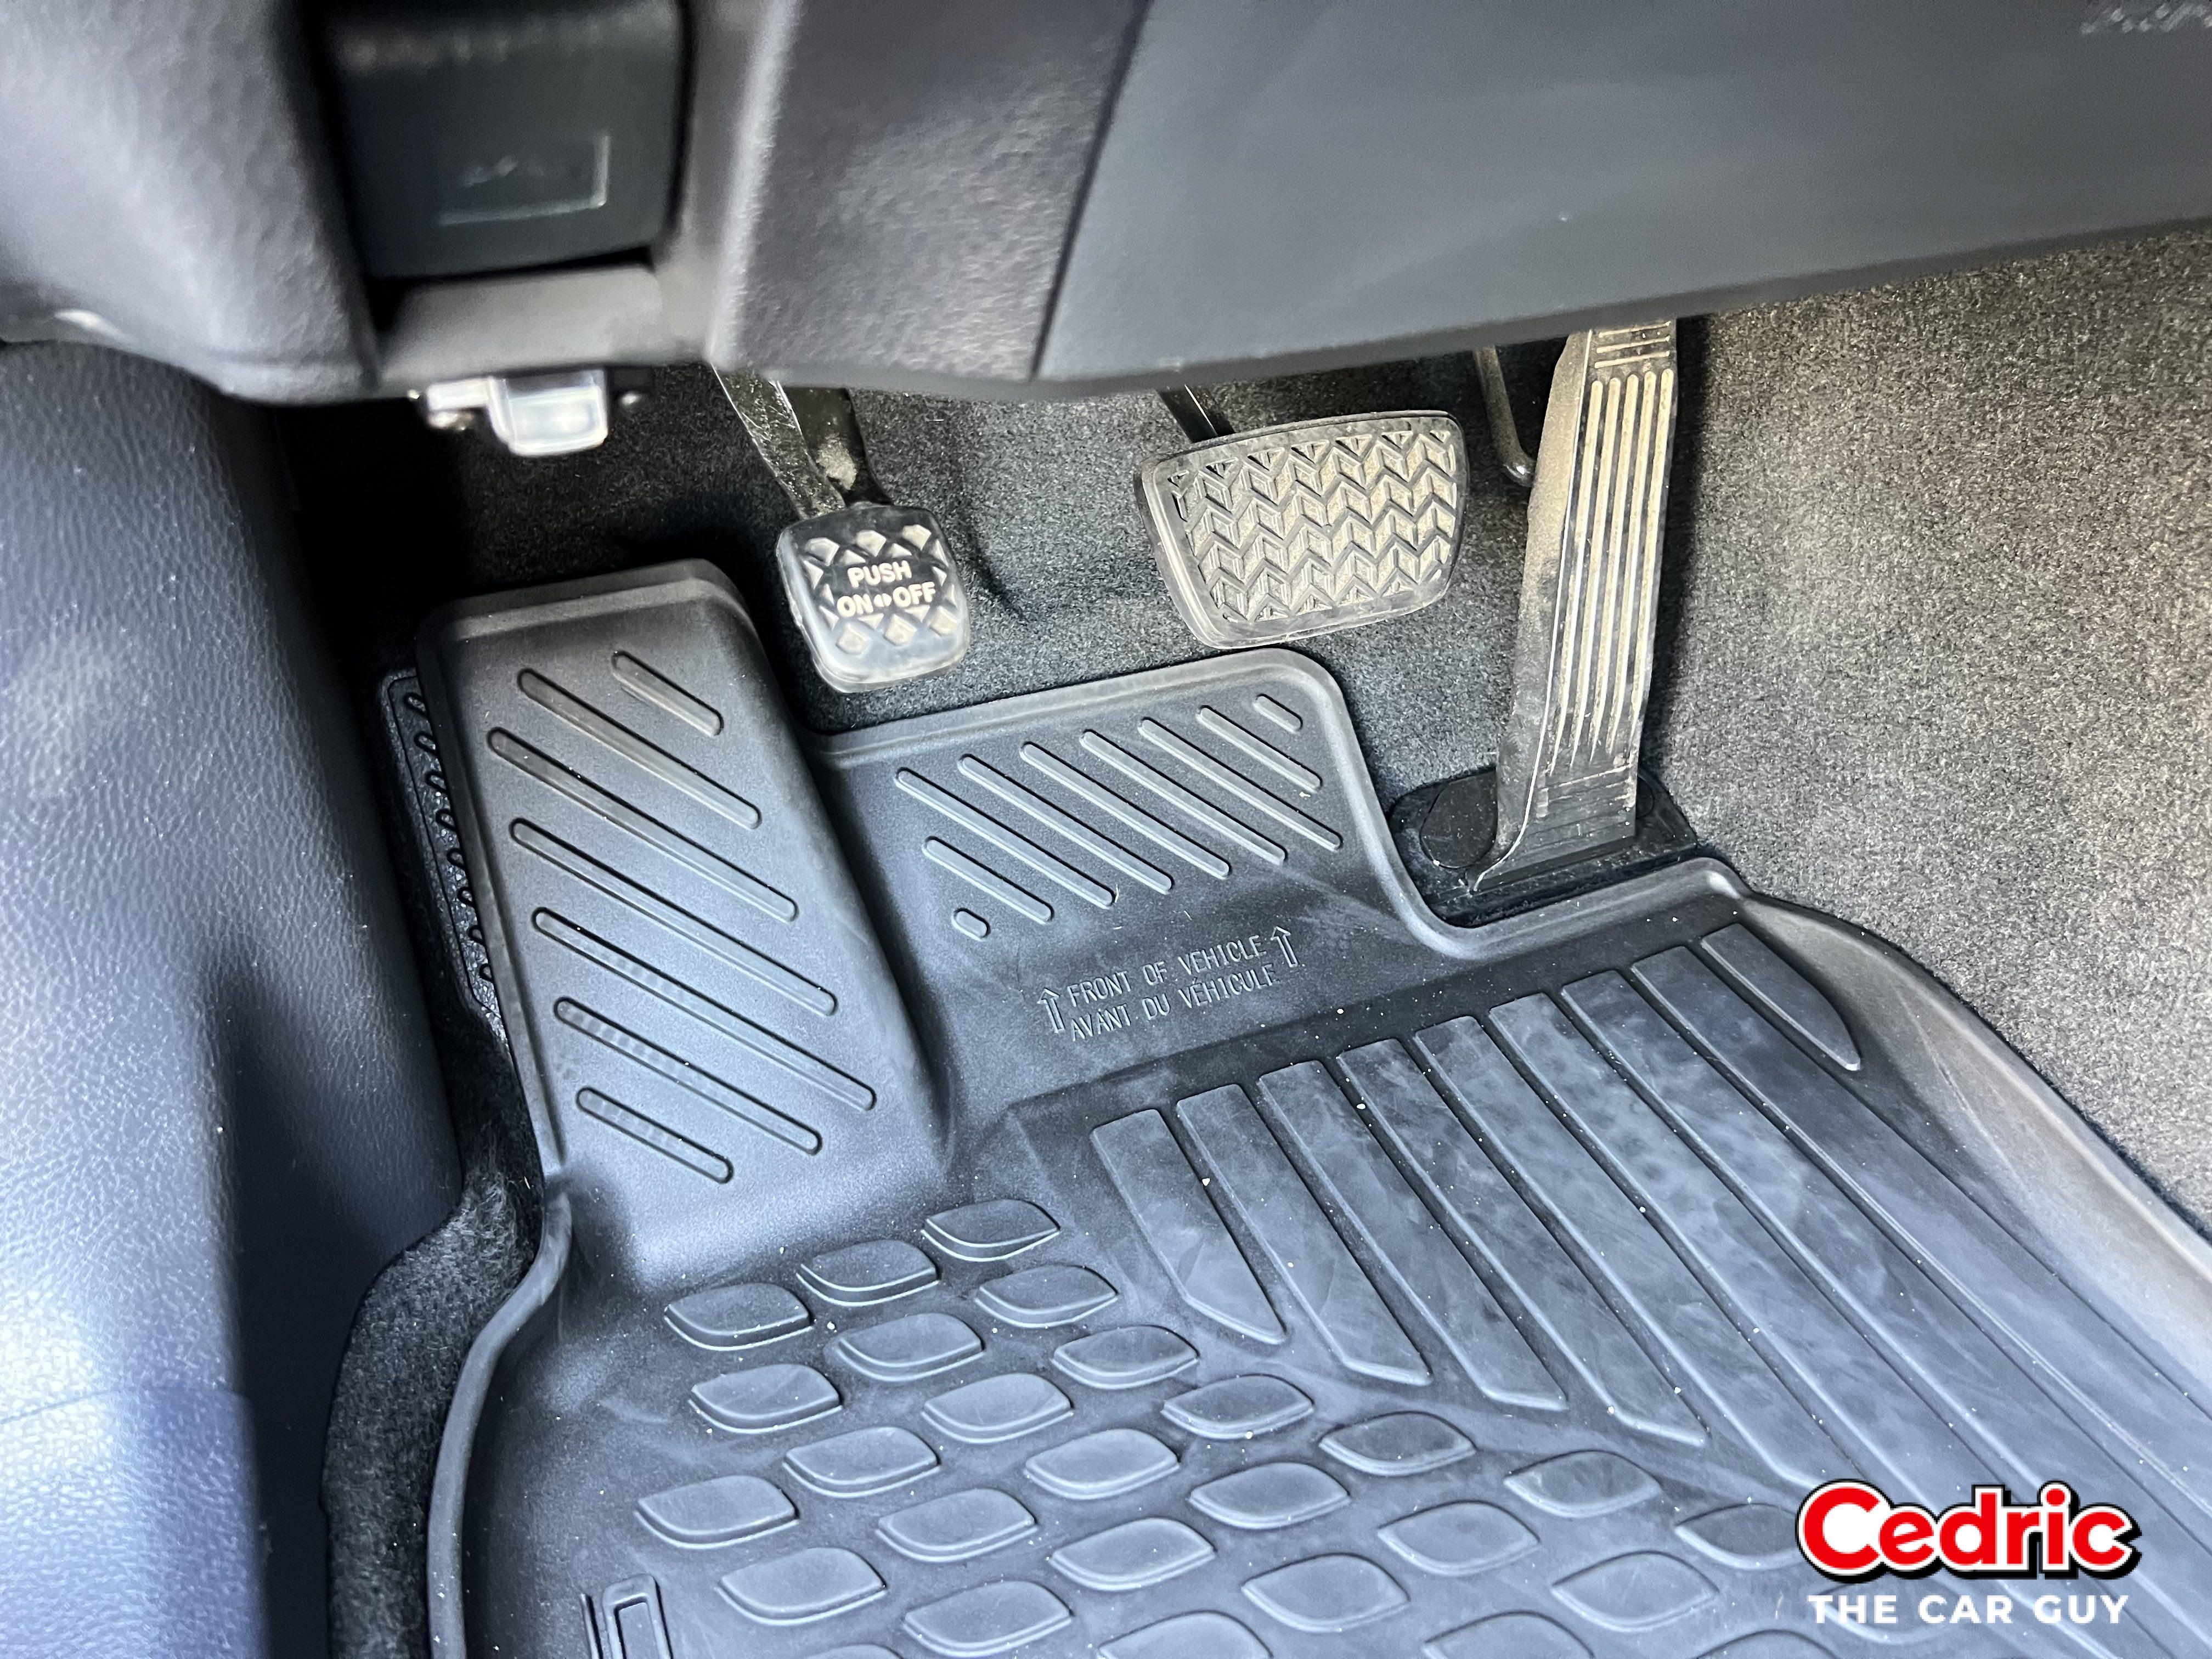 Toyota Footwell: The parking brake is on the left, the brake pedal with Toyota Brake Assist is in the middle, and the gas pedal is on the right.